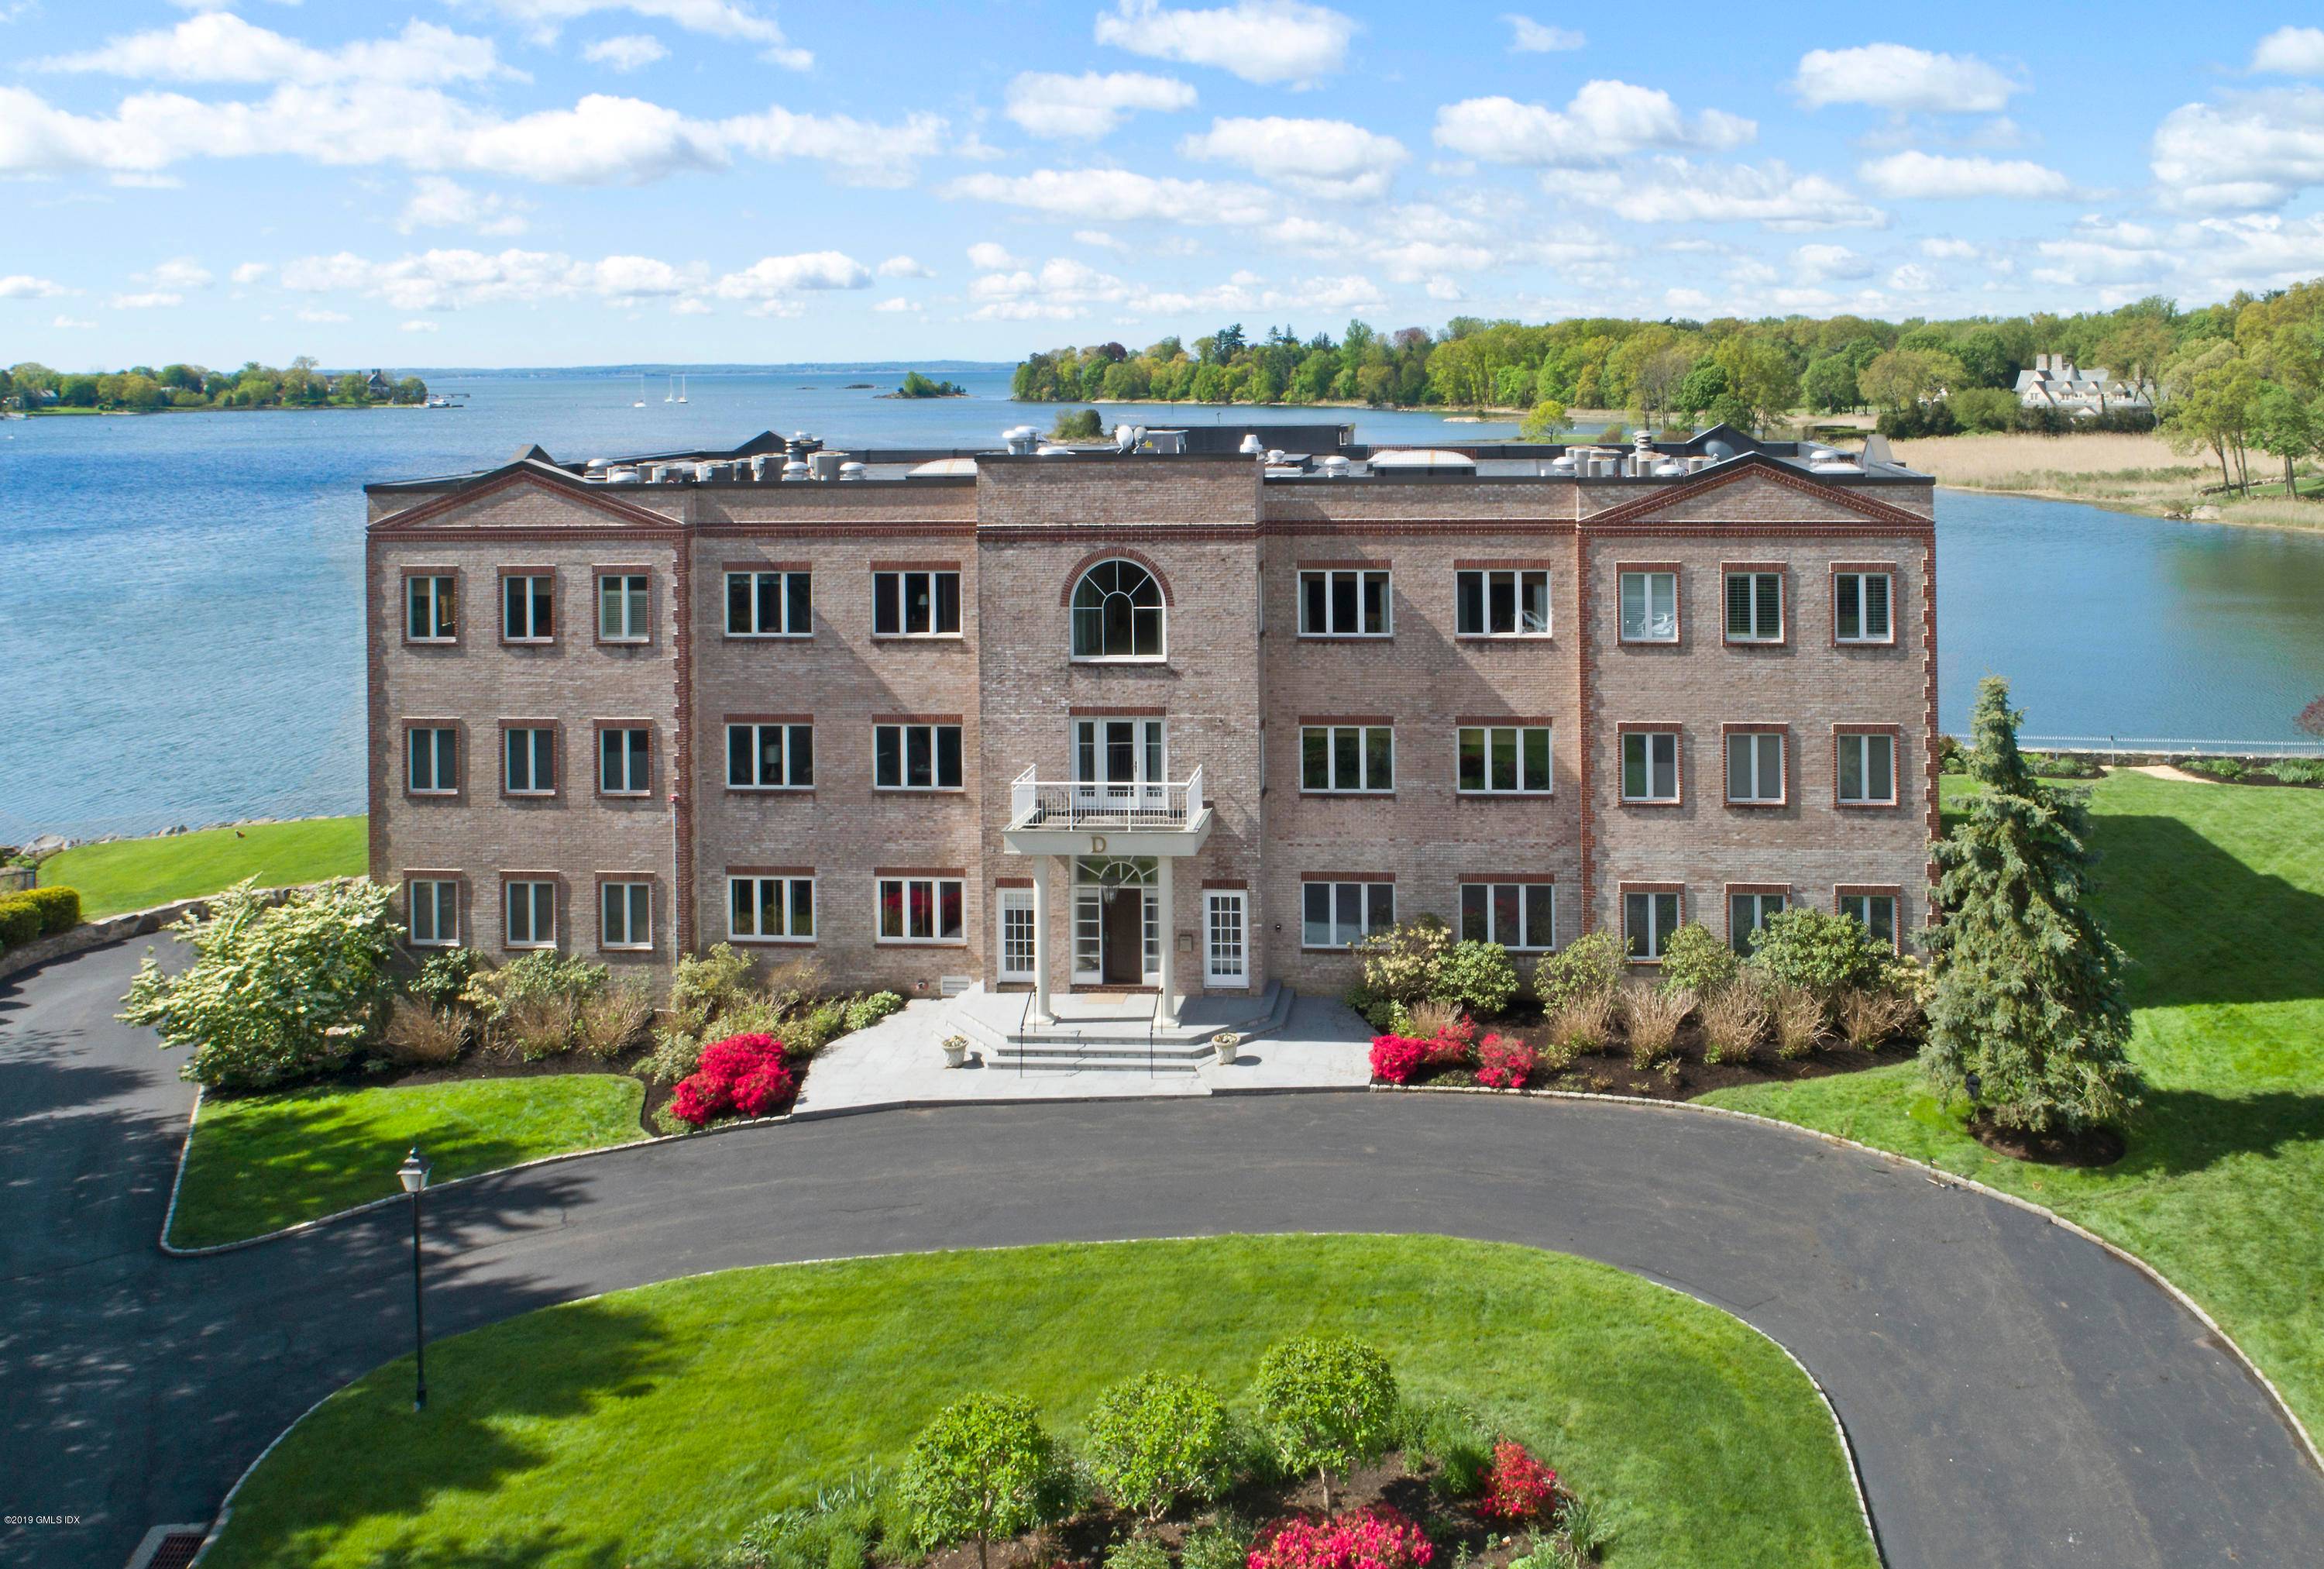 Stunning Penthouse with breathtaking direct waterfront views overlooking Long Island Sound.